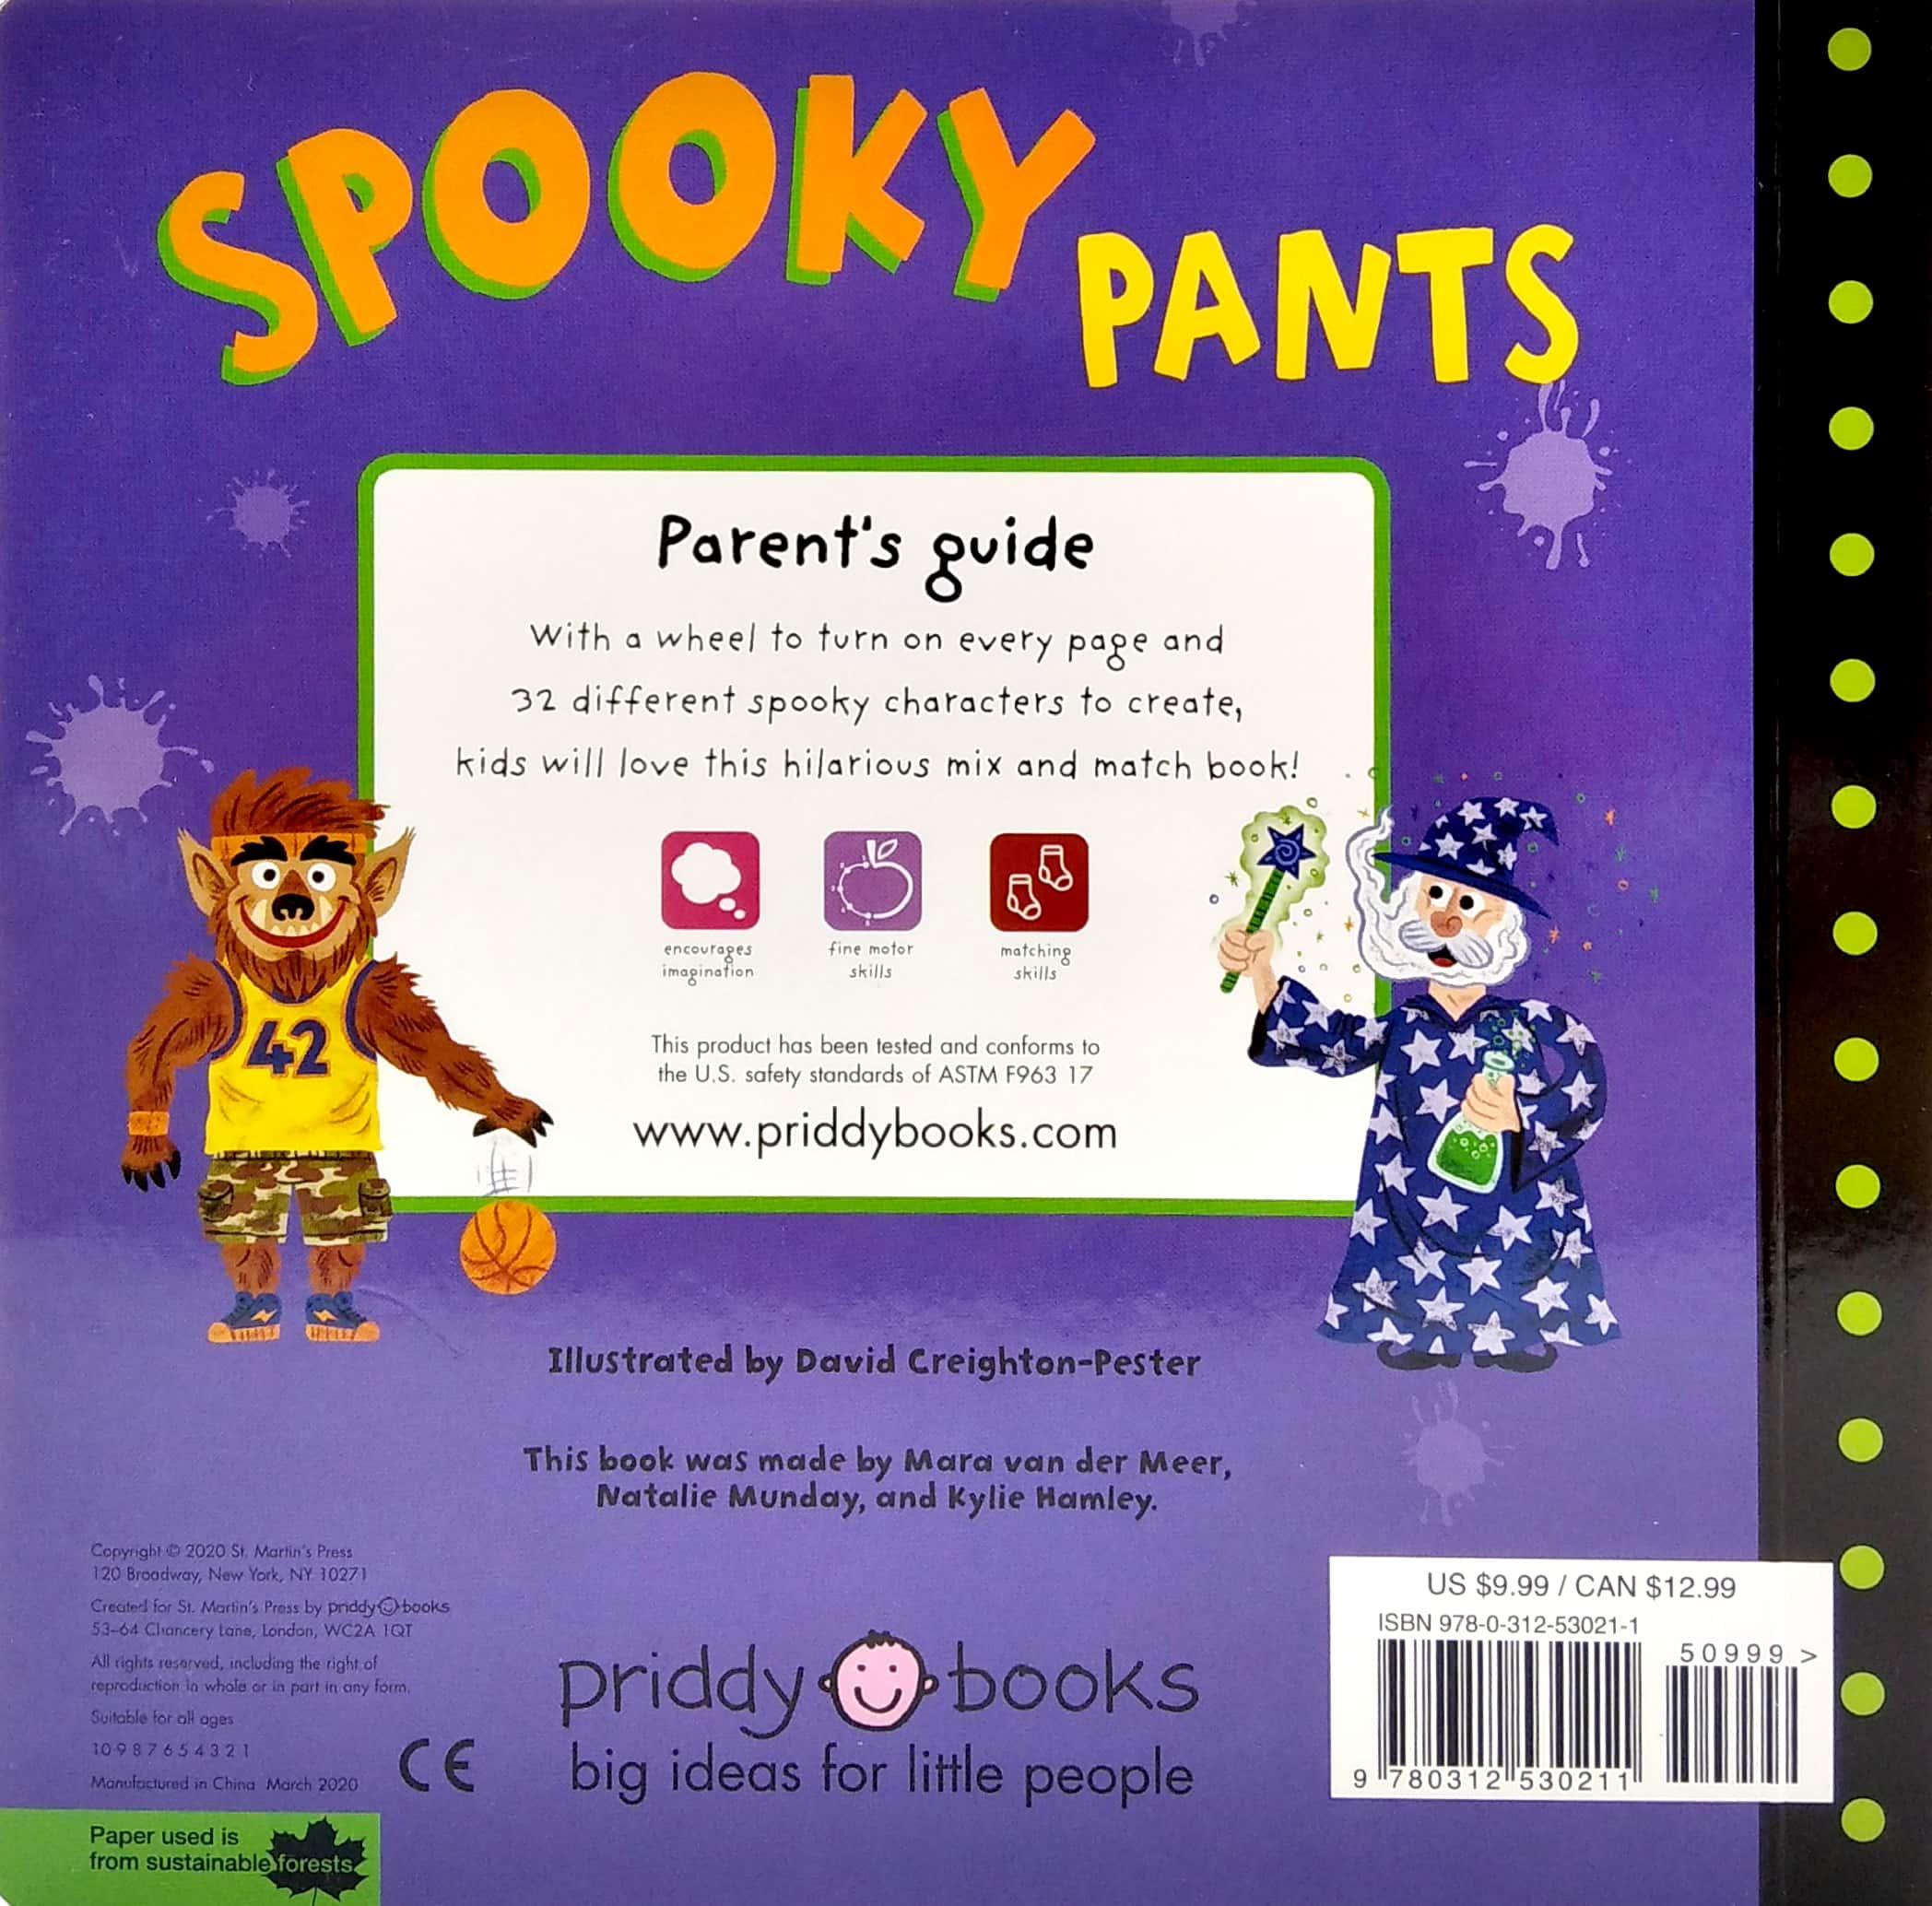 Turn The Wheel: Spooky Pants: Mix & Match For Hilarious Results